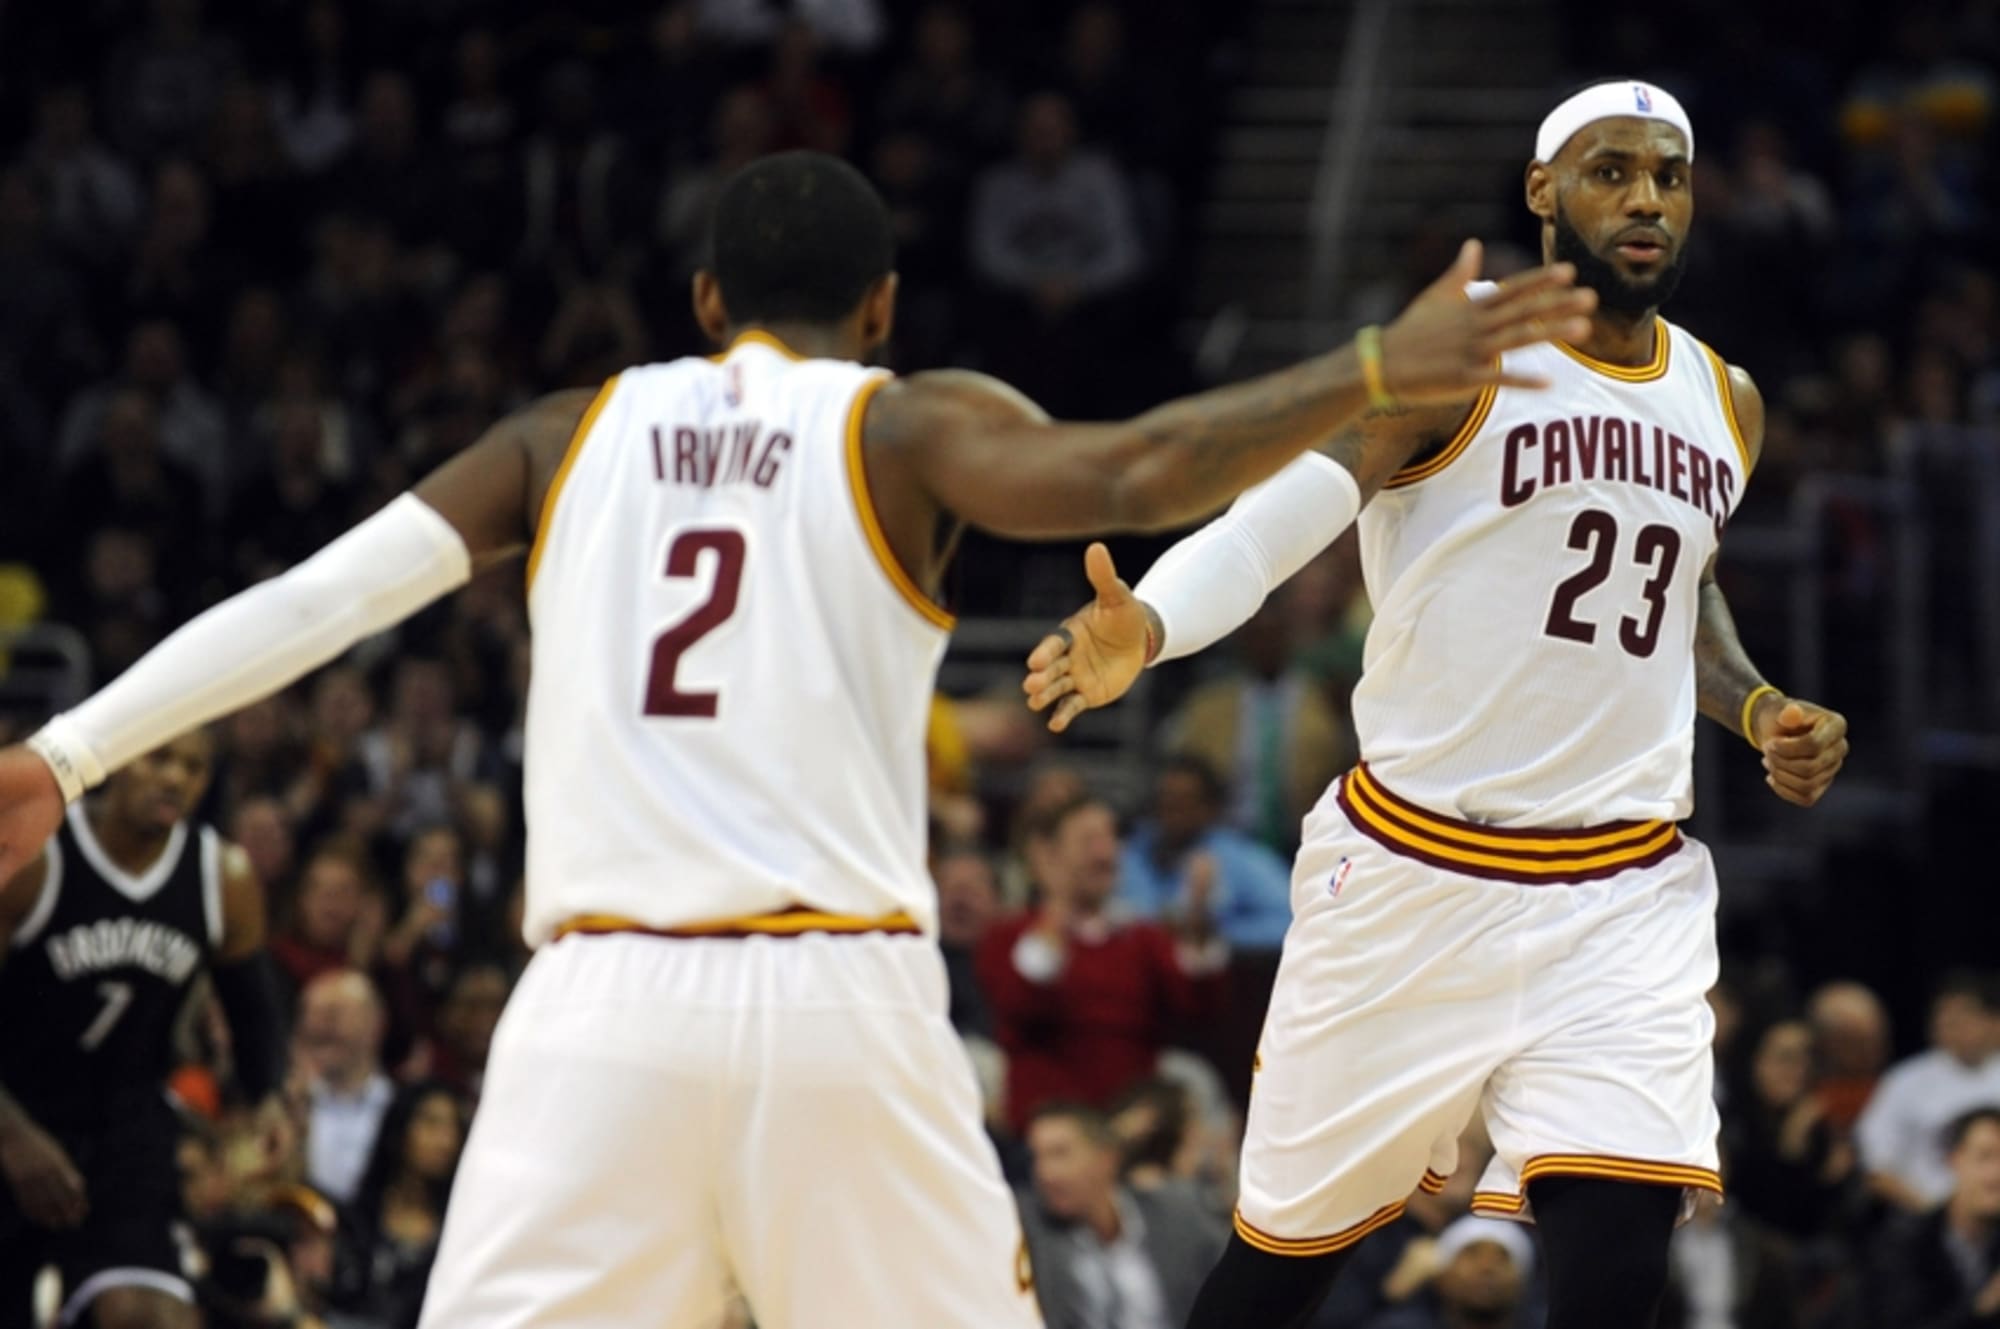 Full highlights from LeBron James' Game One against Boston